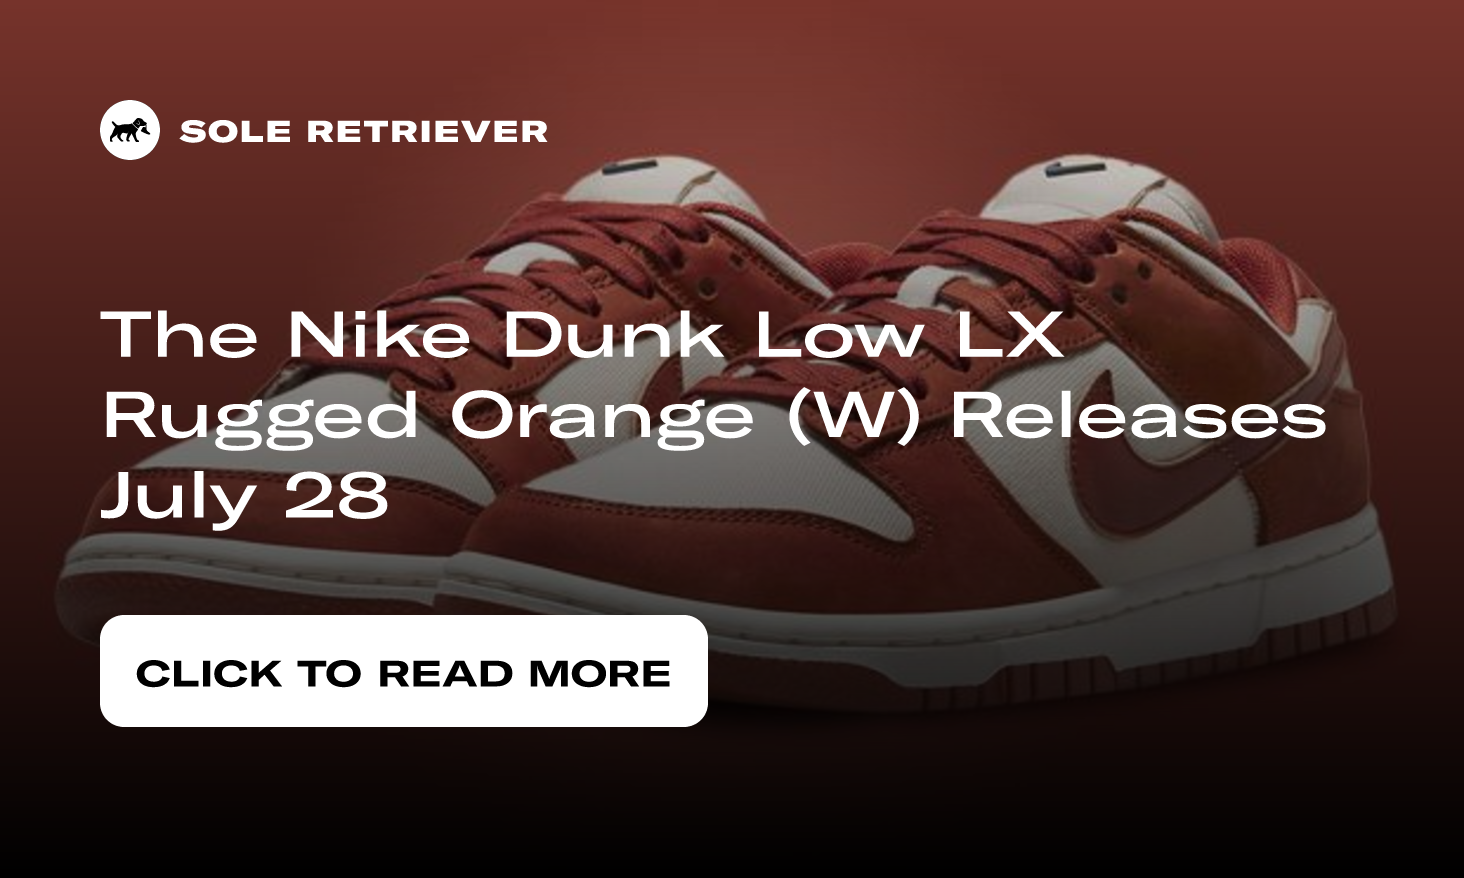 The Nike Dunk Low LX Rugged Orange (W) Releases July 28